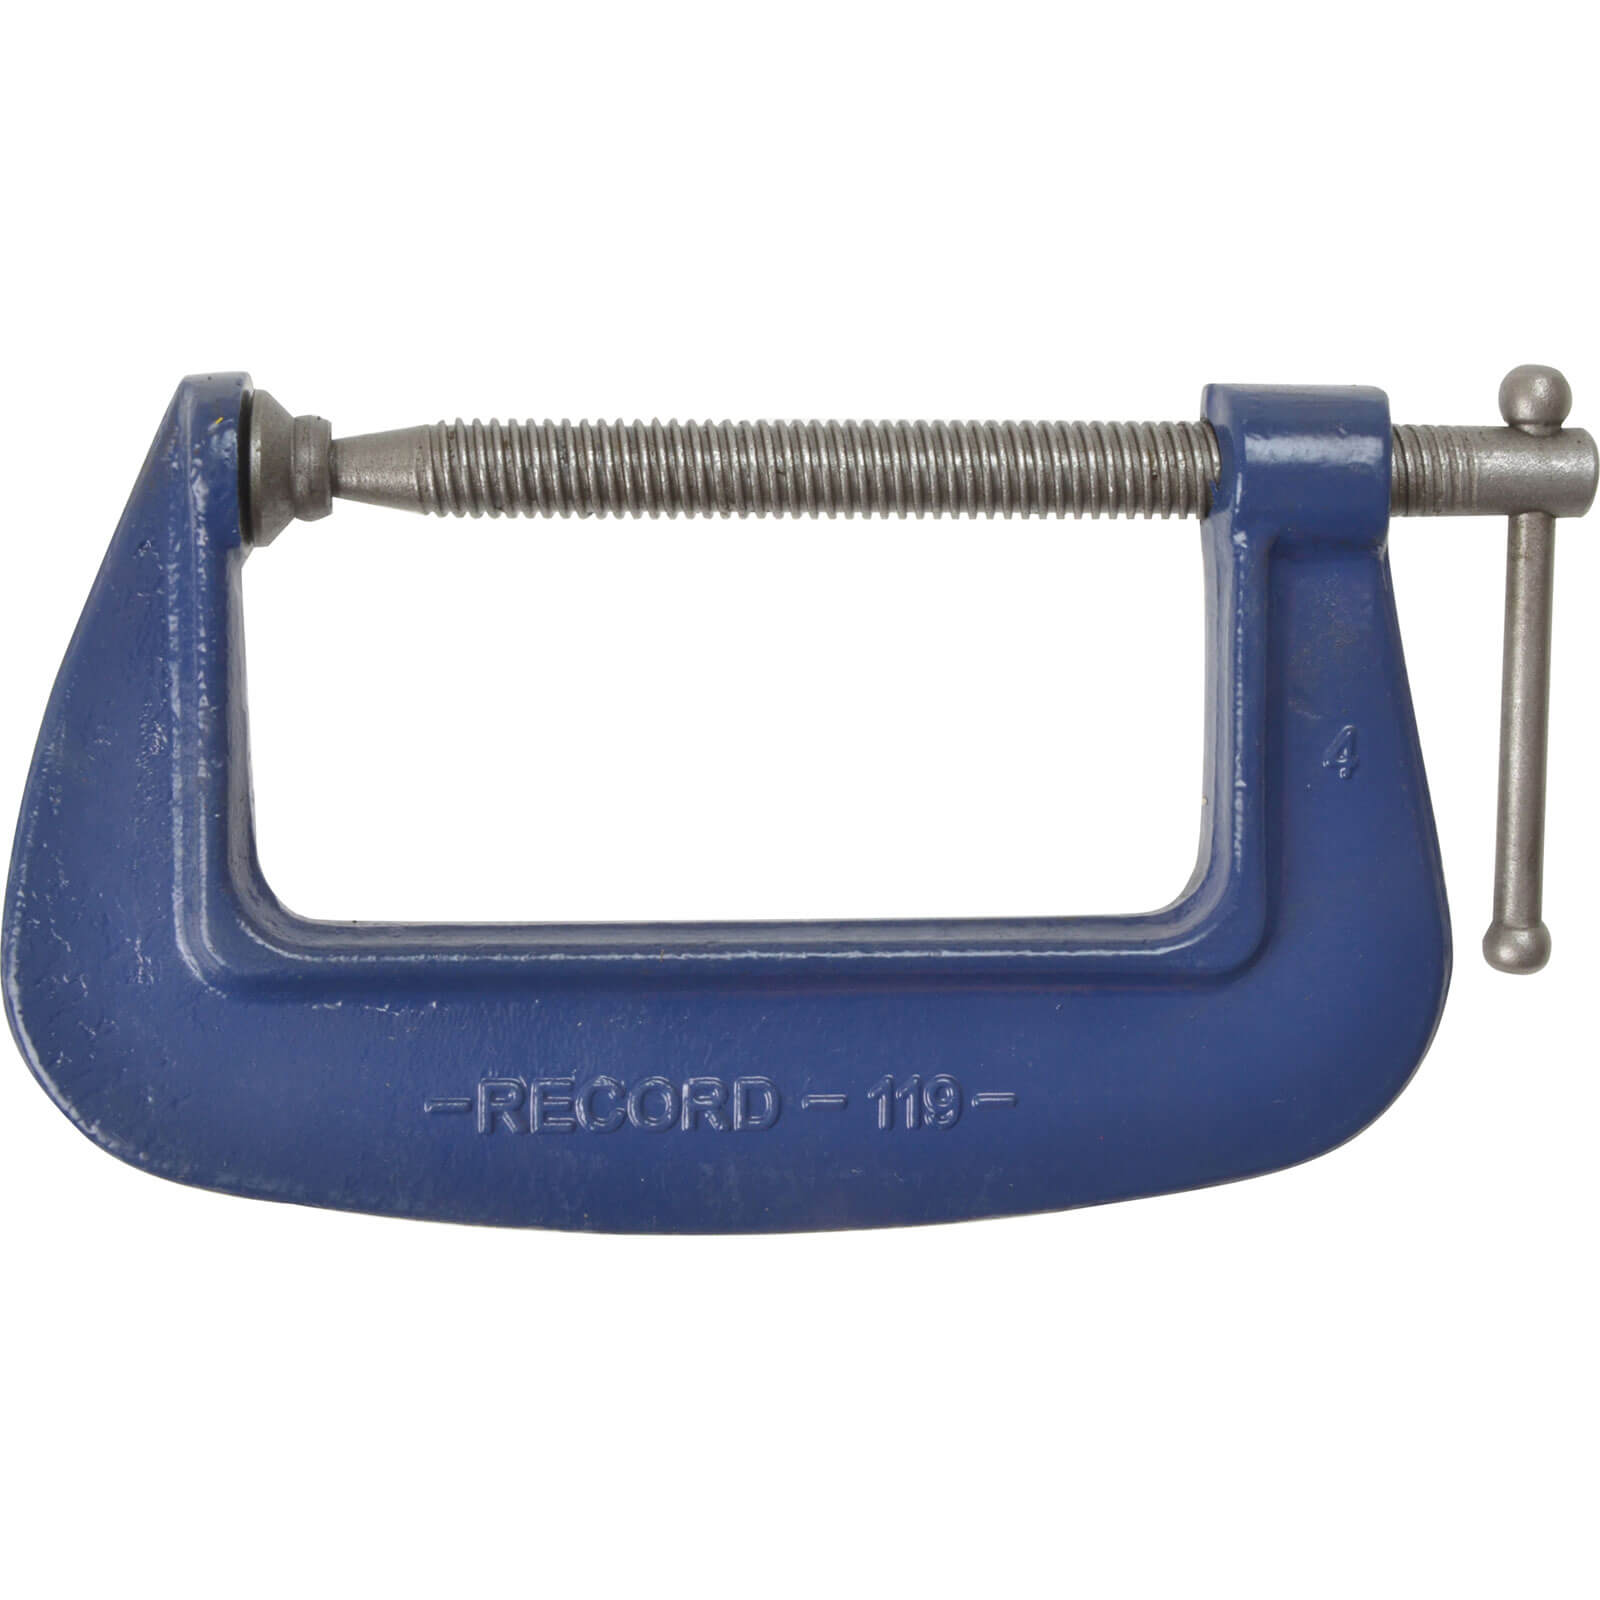 Photo of Irwin Record 119 G Clamp 150mm